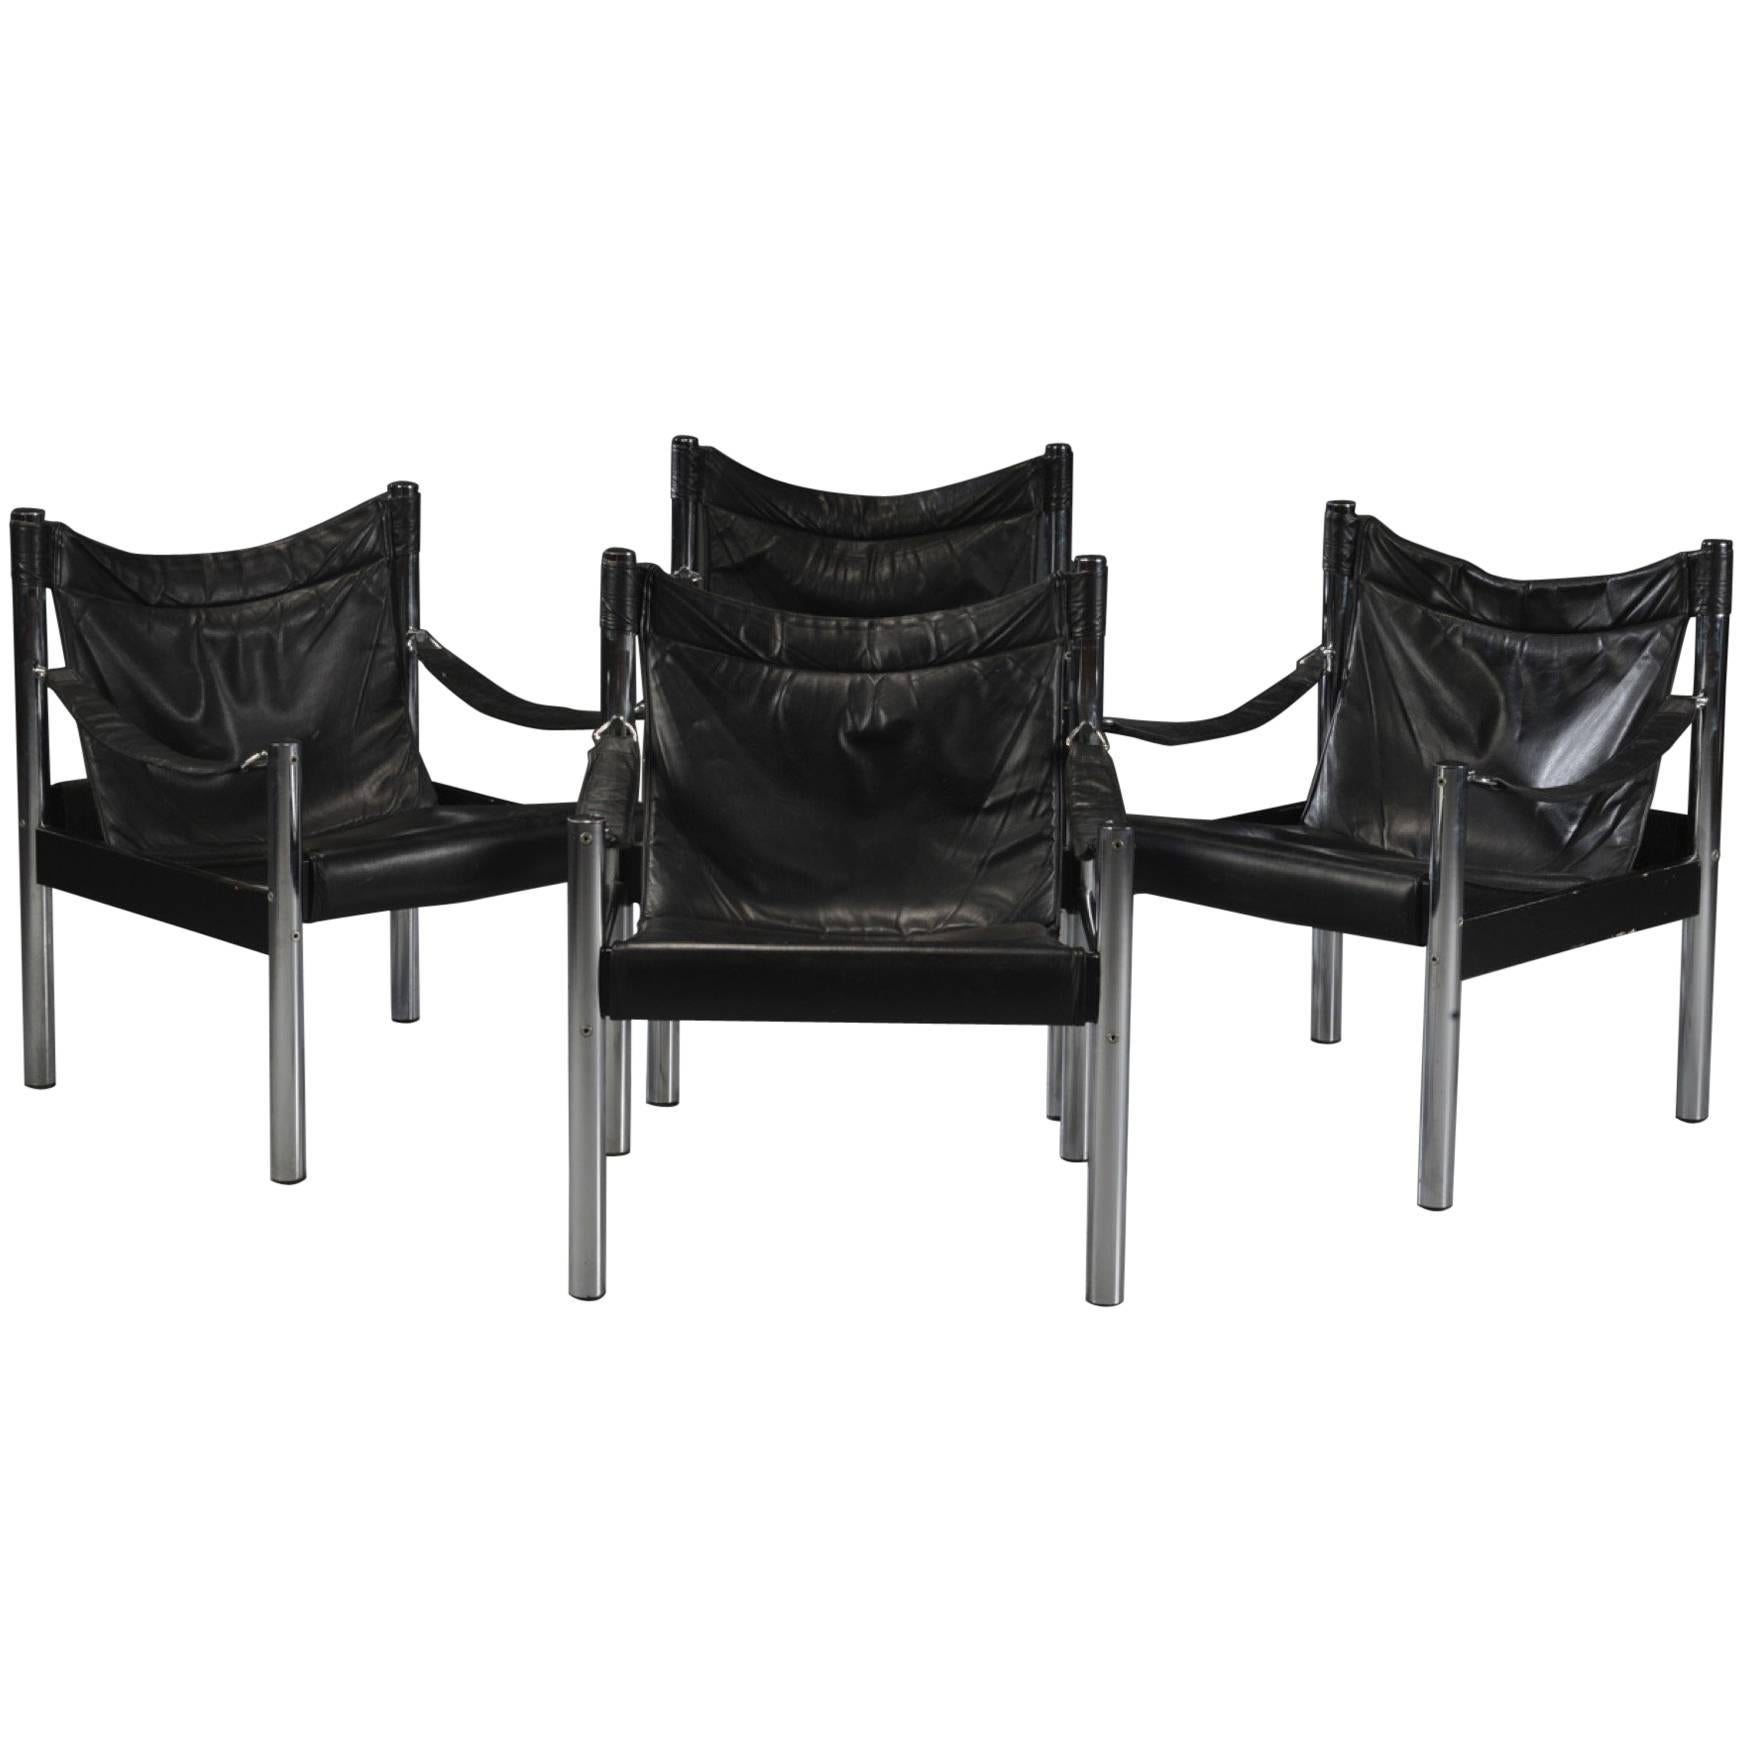 Four Midcentury 1960s Chrome Safari Chairs in Black Leather